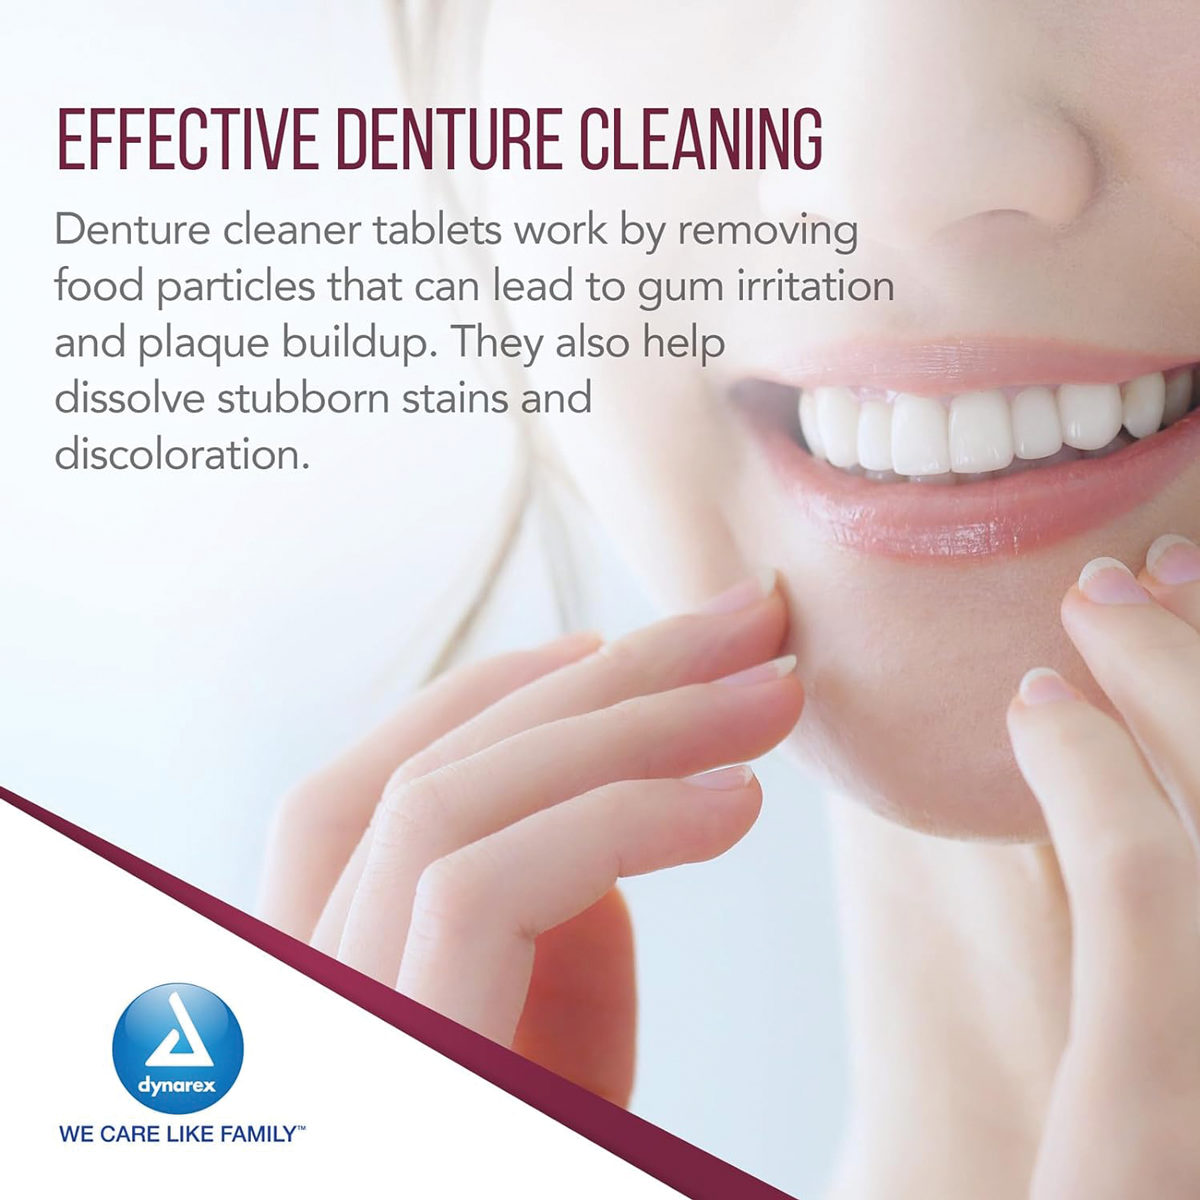 Effective Denture Cleaning